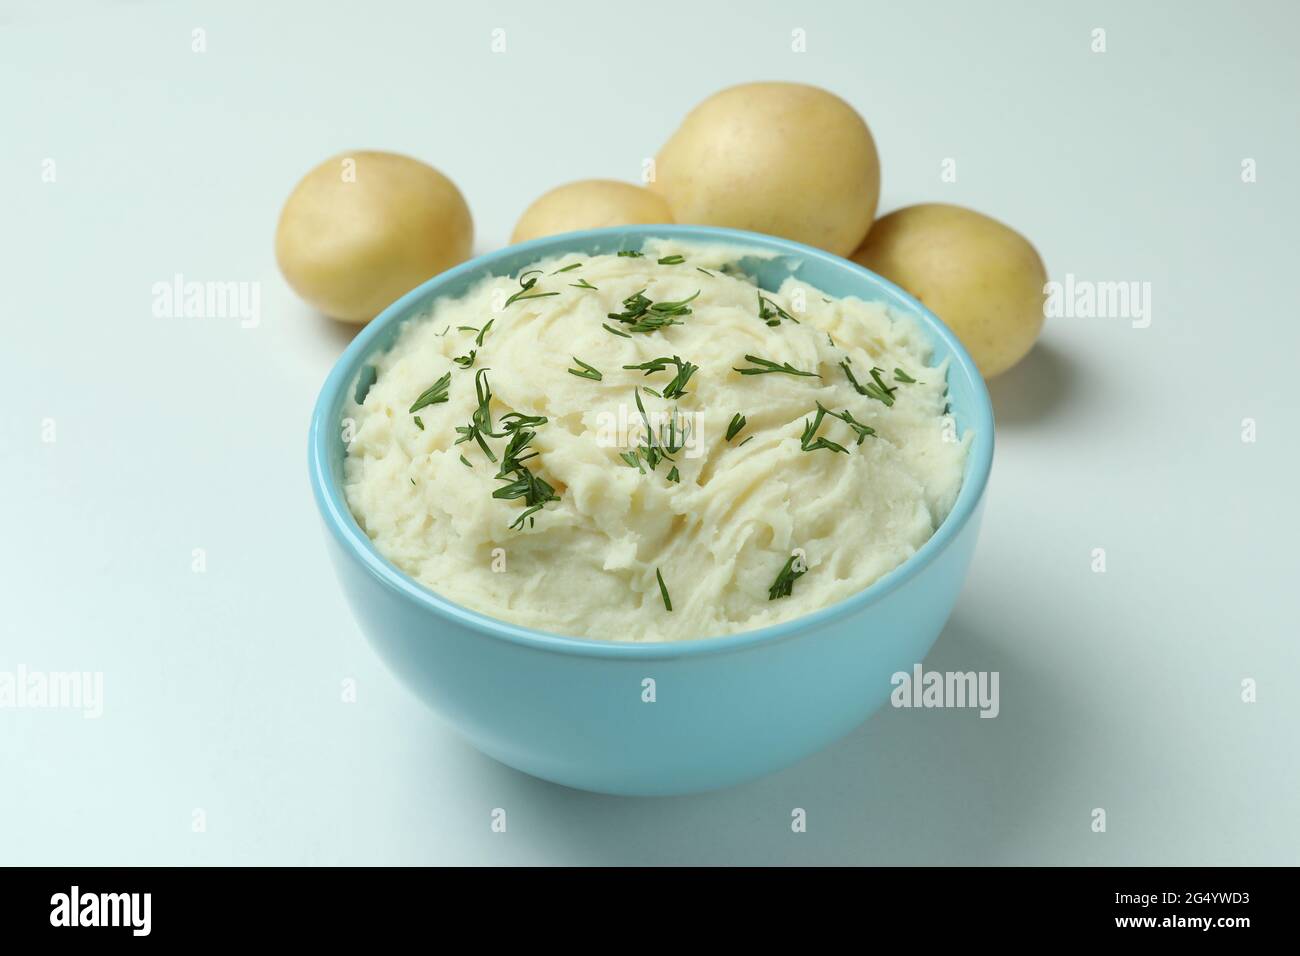 Plate of mashed potatoes and ingredients on white background Stock Photo